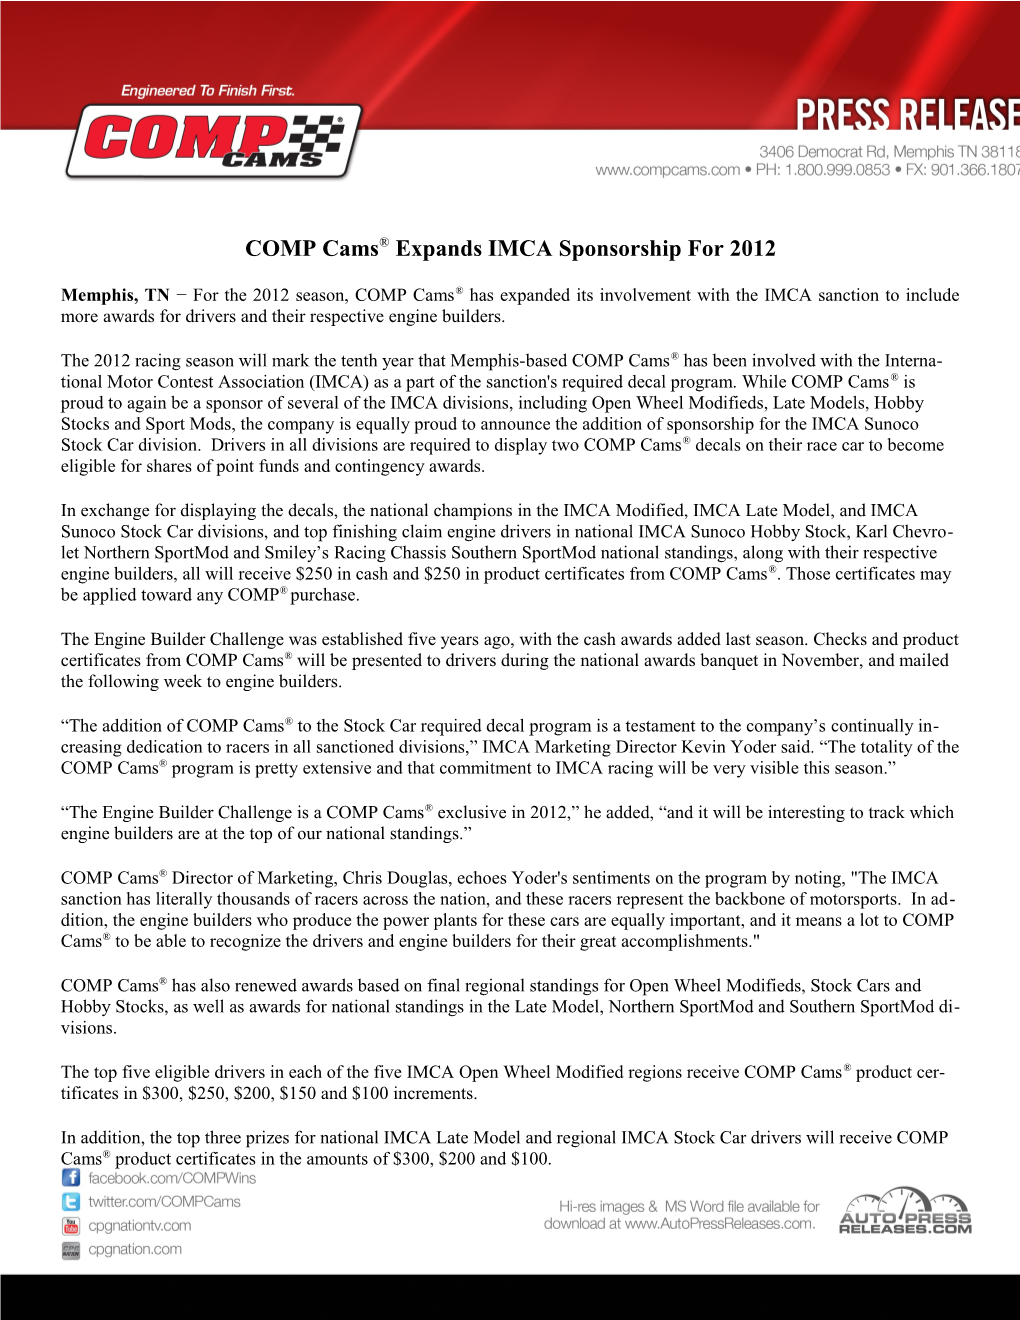 COMP Cams Expands IMCA Sponsorship for 2012